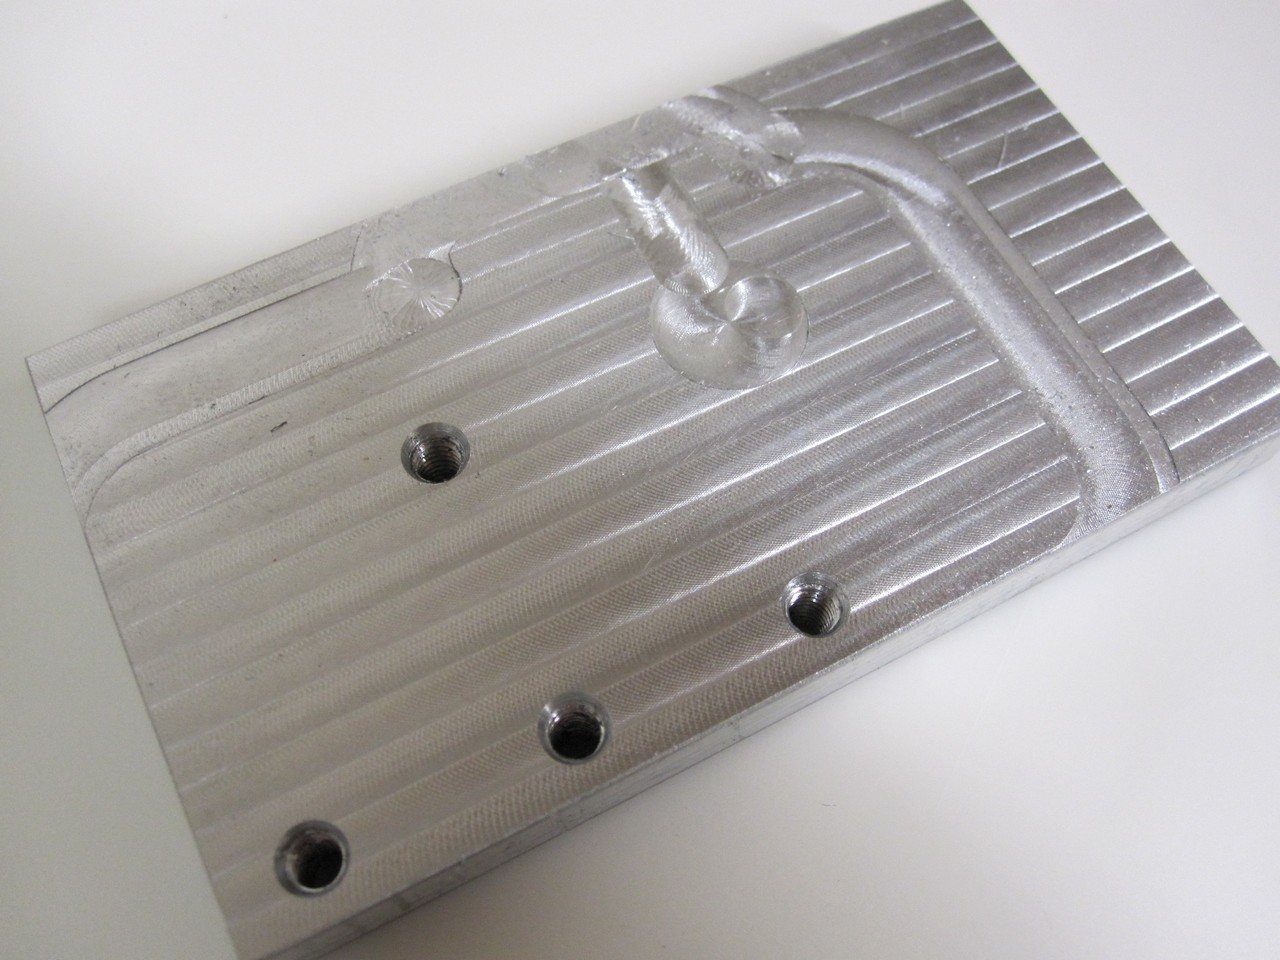 The fixturing plate used to hold the workpiece.